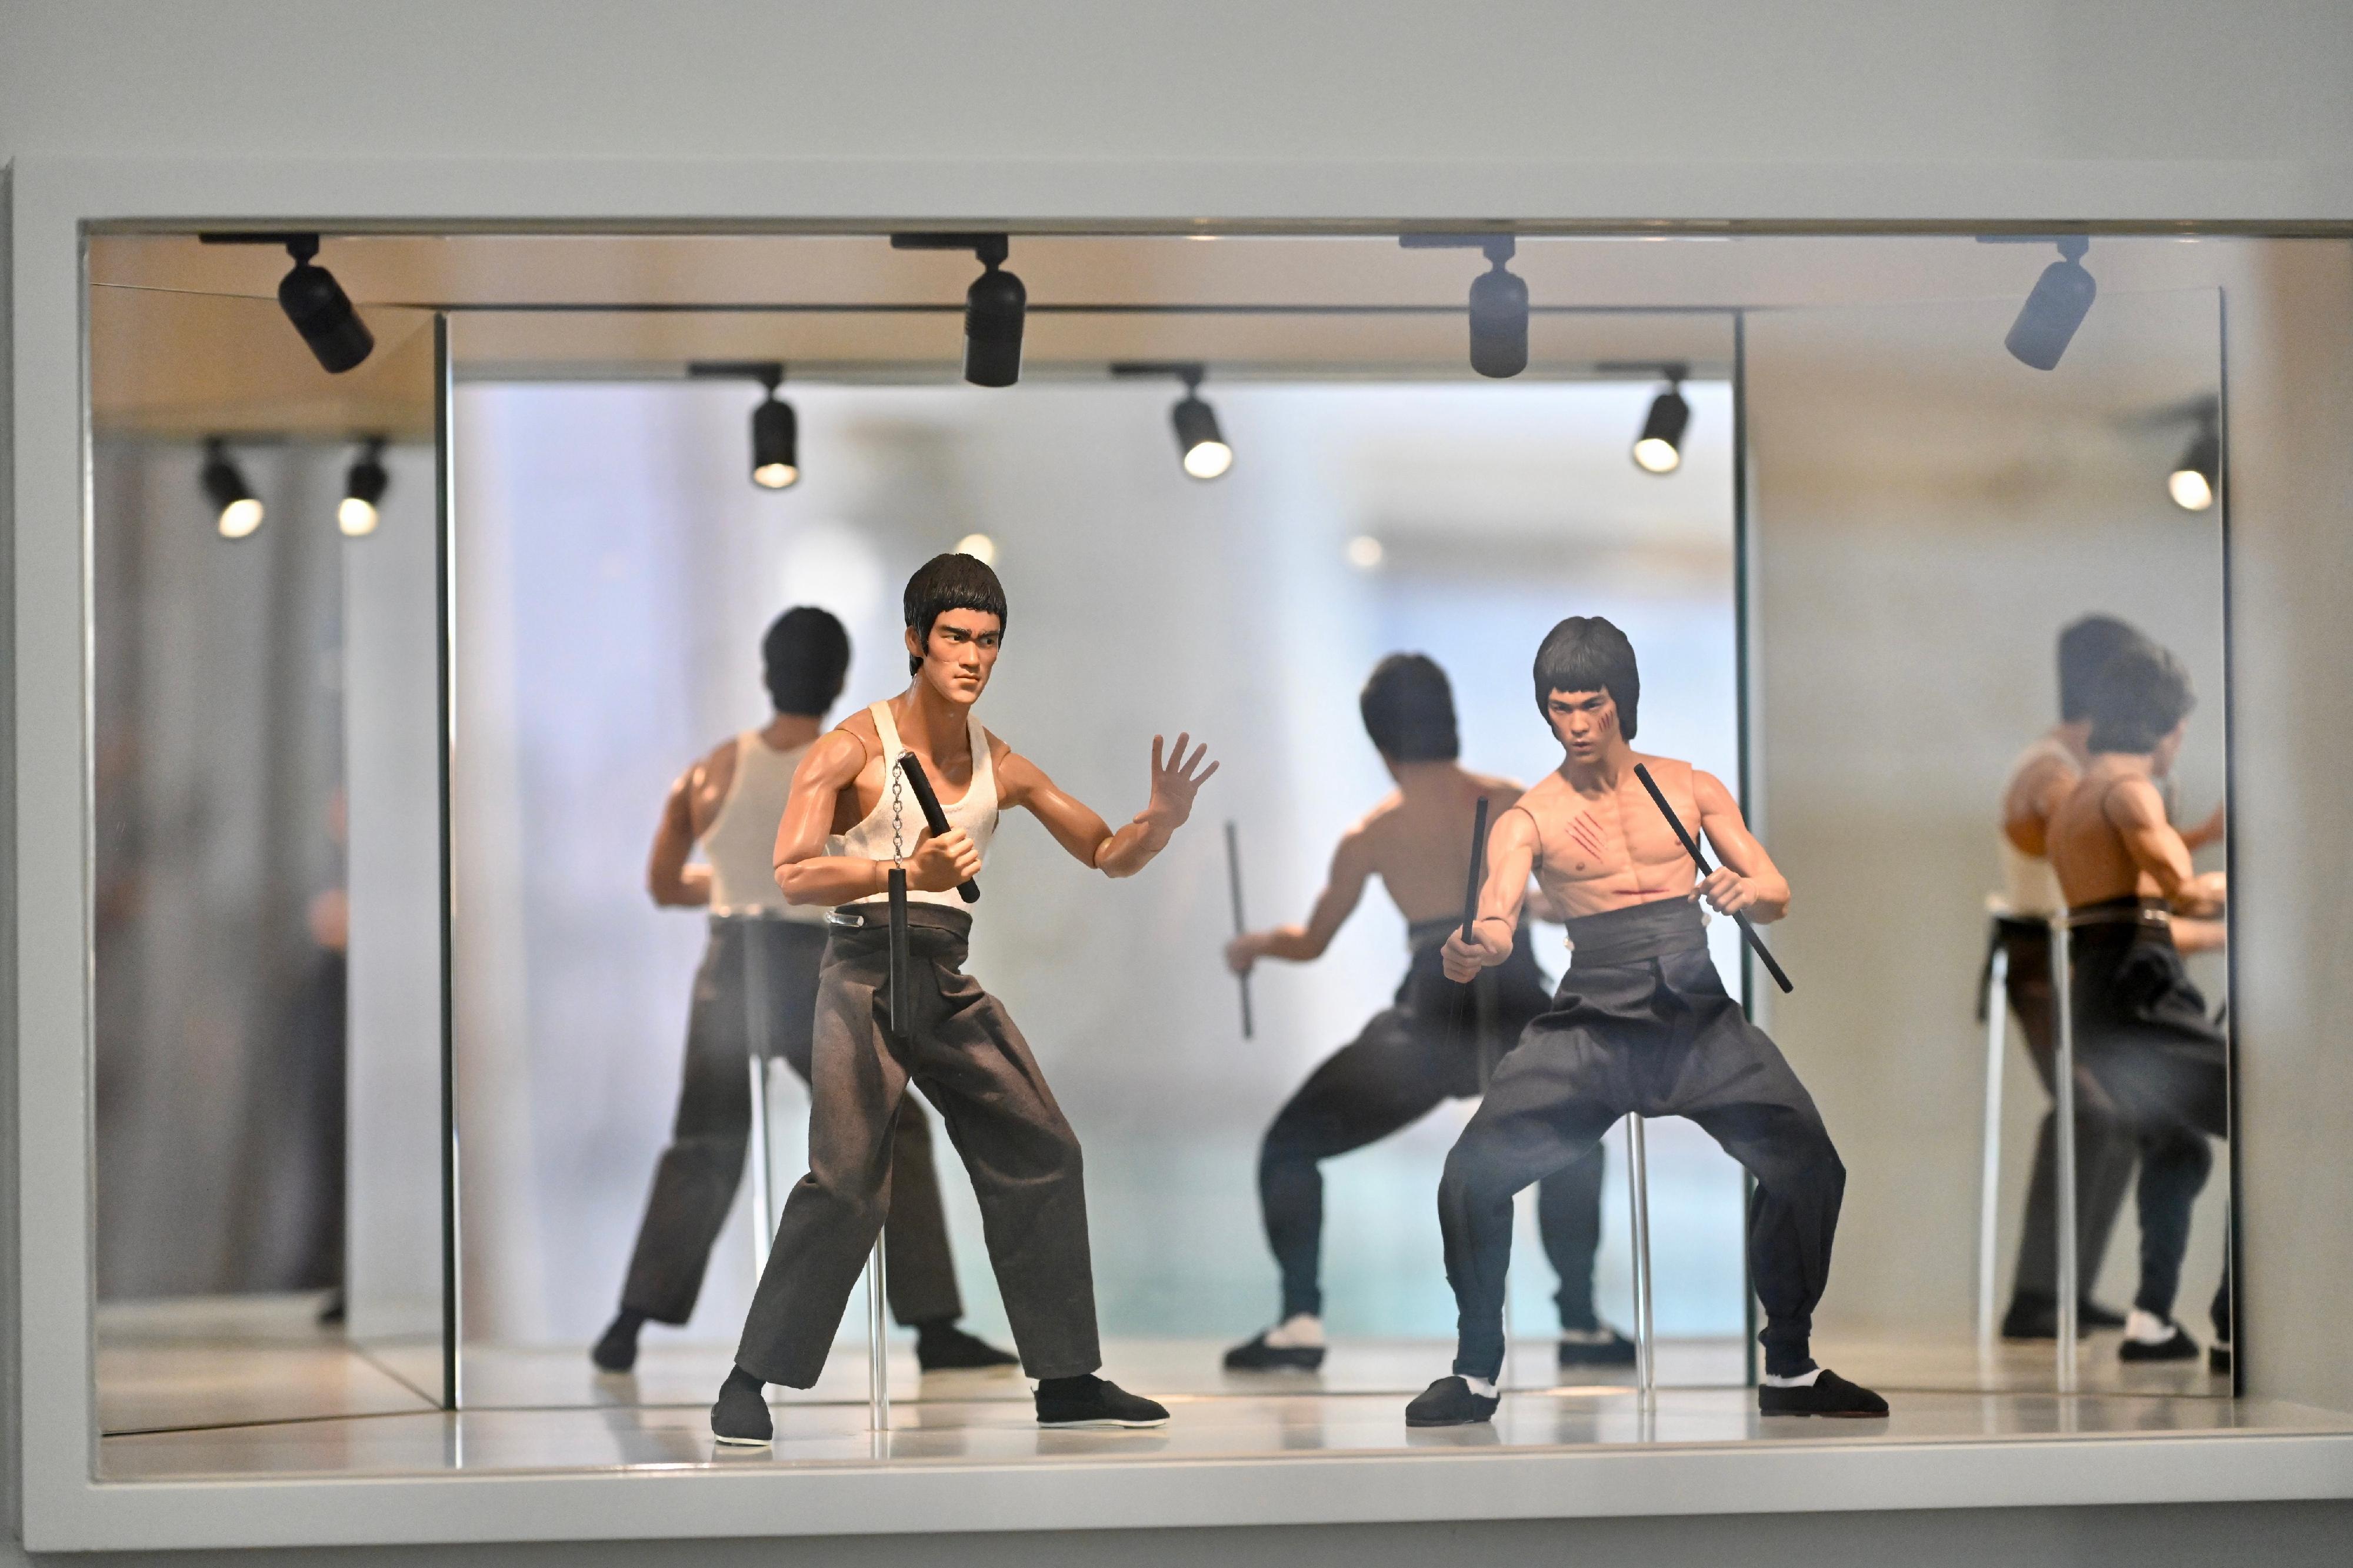 The pop-up display "Bruce Lee: a Timeless Classic" will be open to the public from tomorrow (July 12) at the Hong Kong Heritage Museum. Photo shows figures of Bruce Lee.